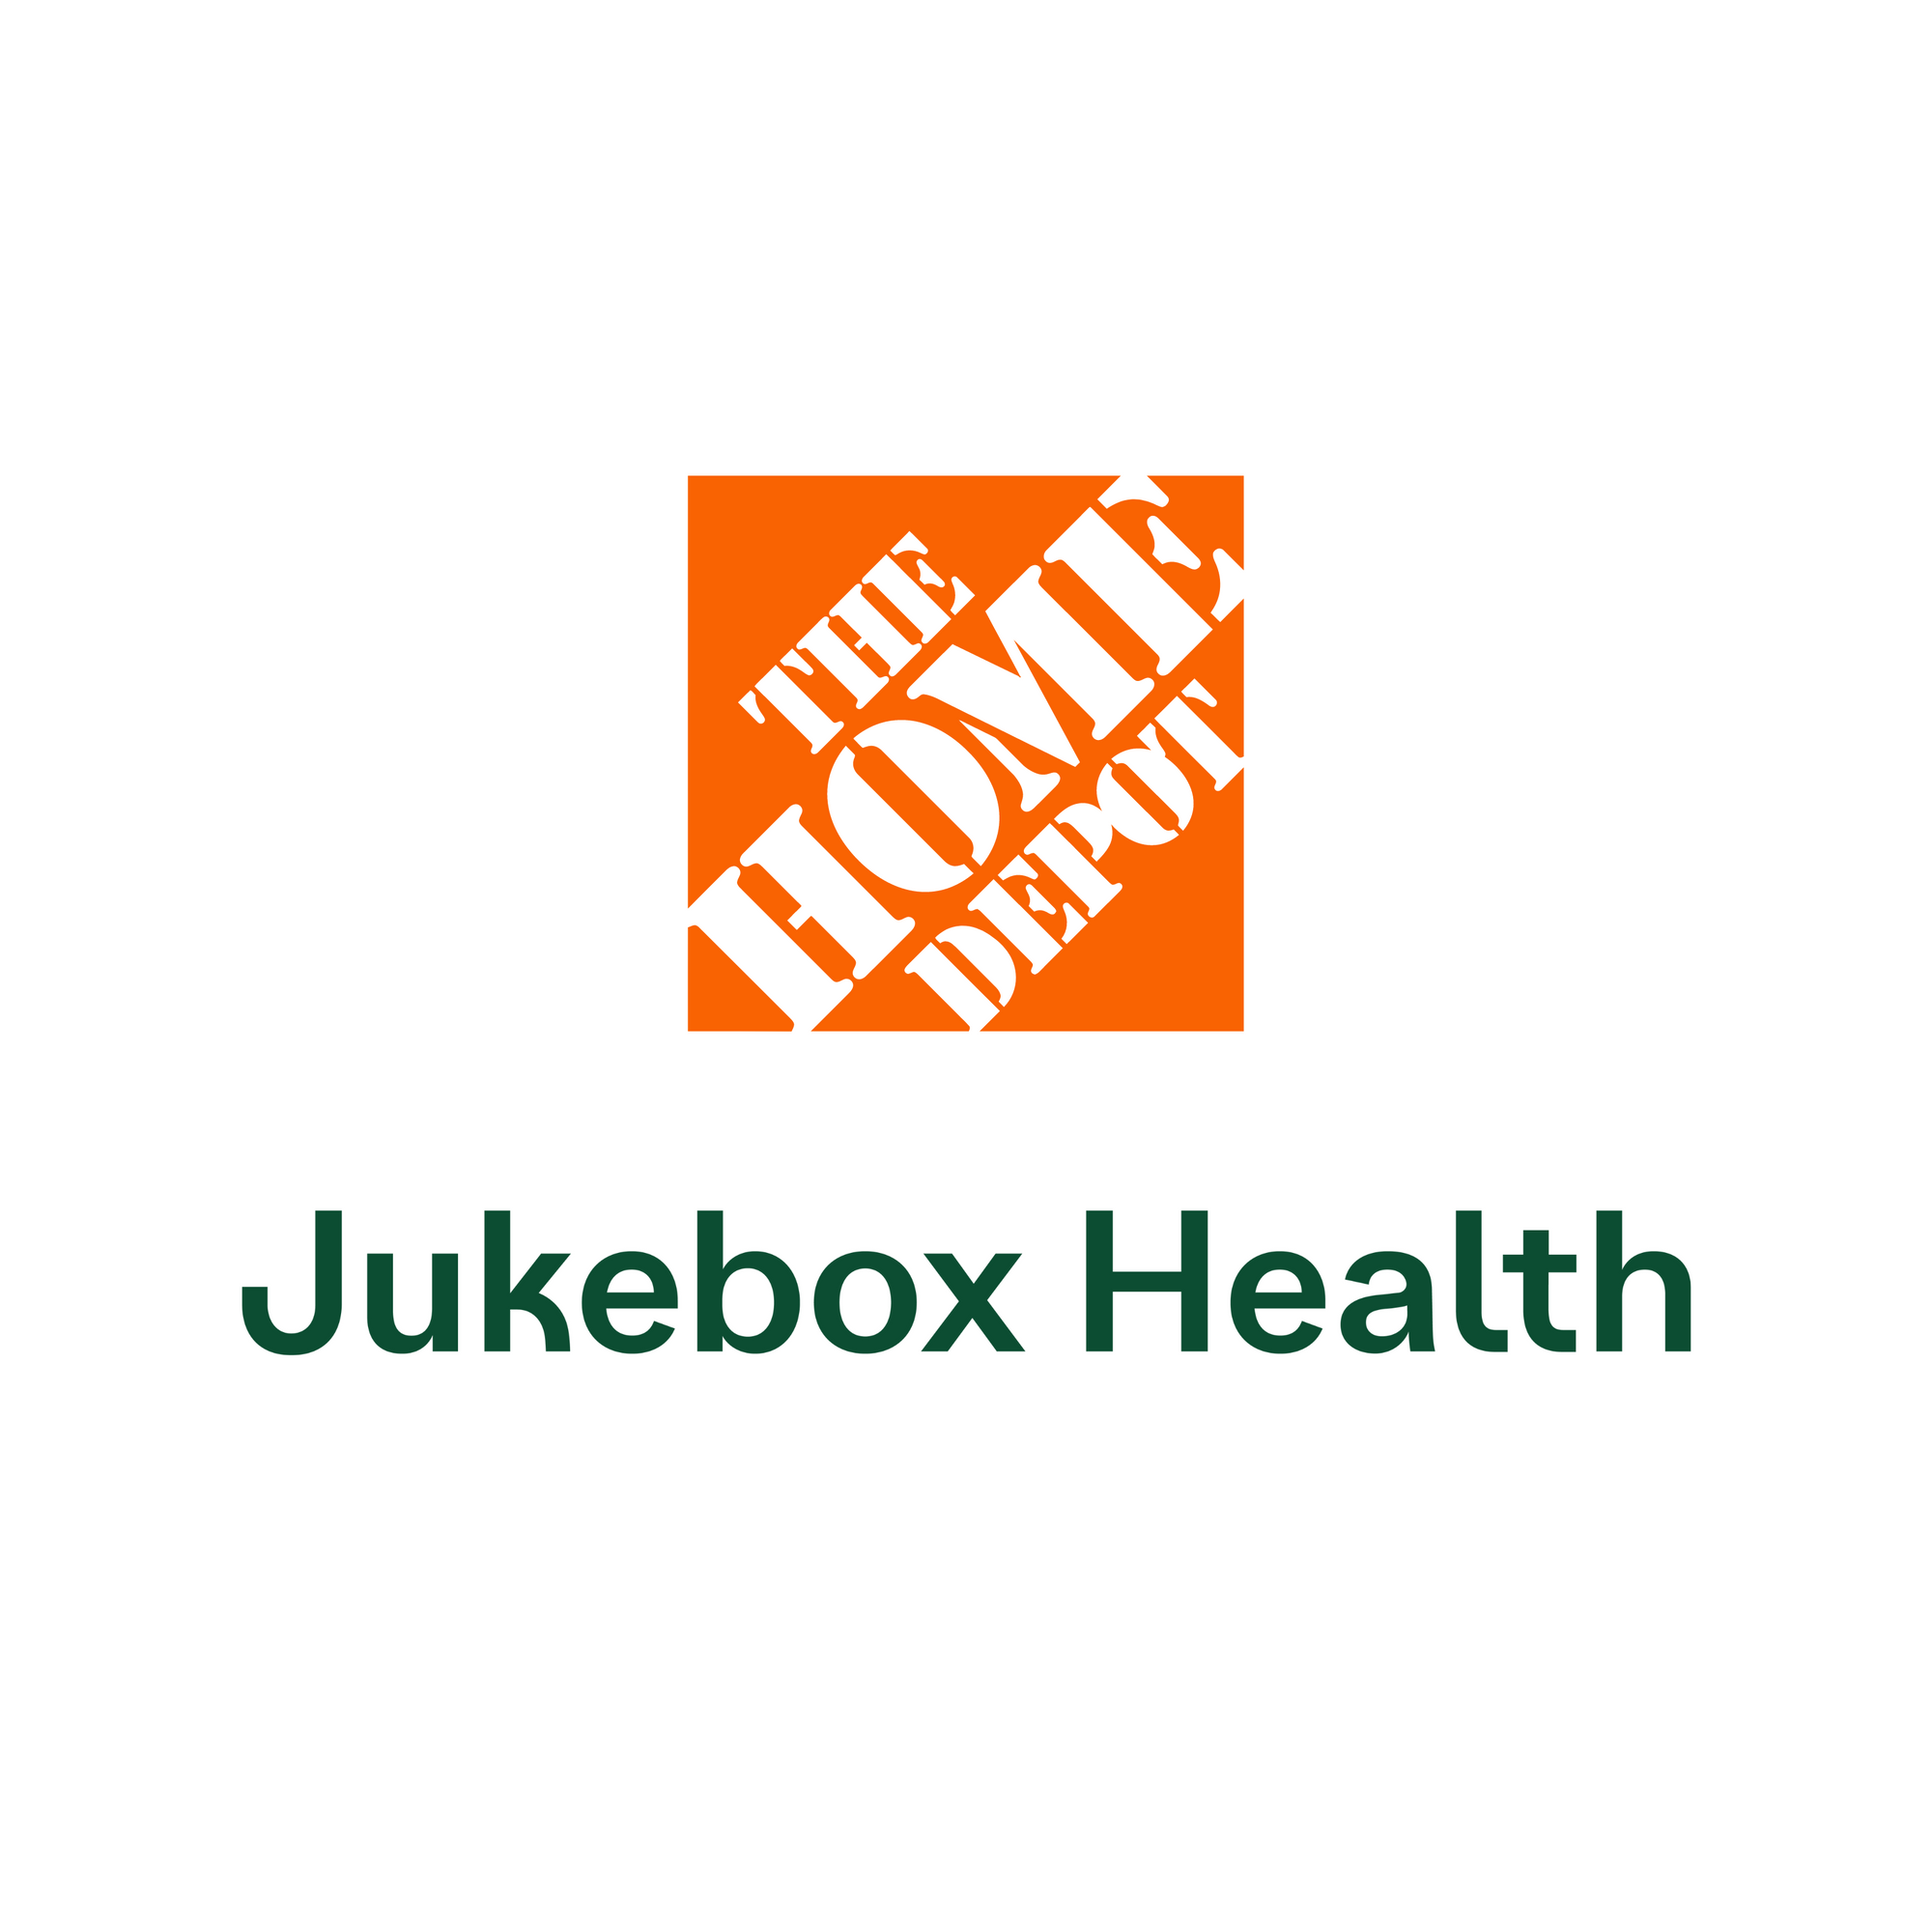 Jukebox Health Announces Investment from Home Depot Ventures